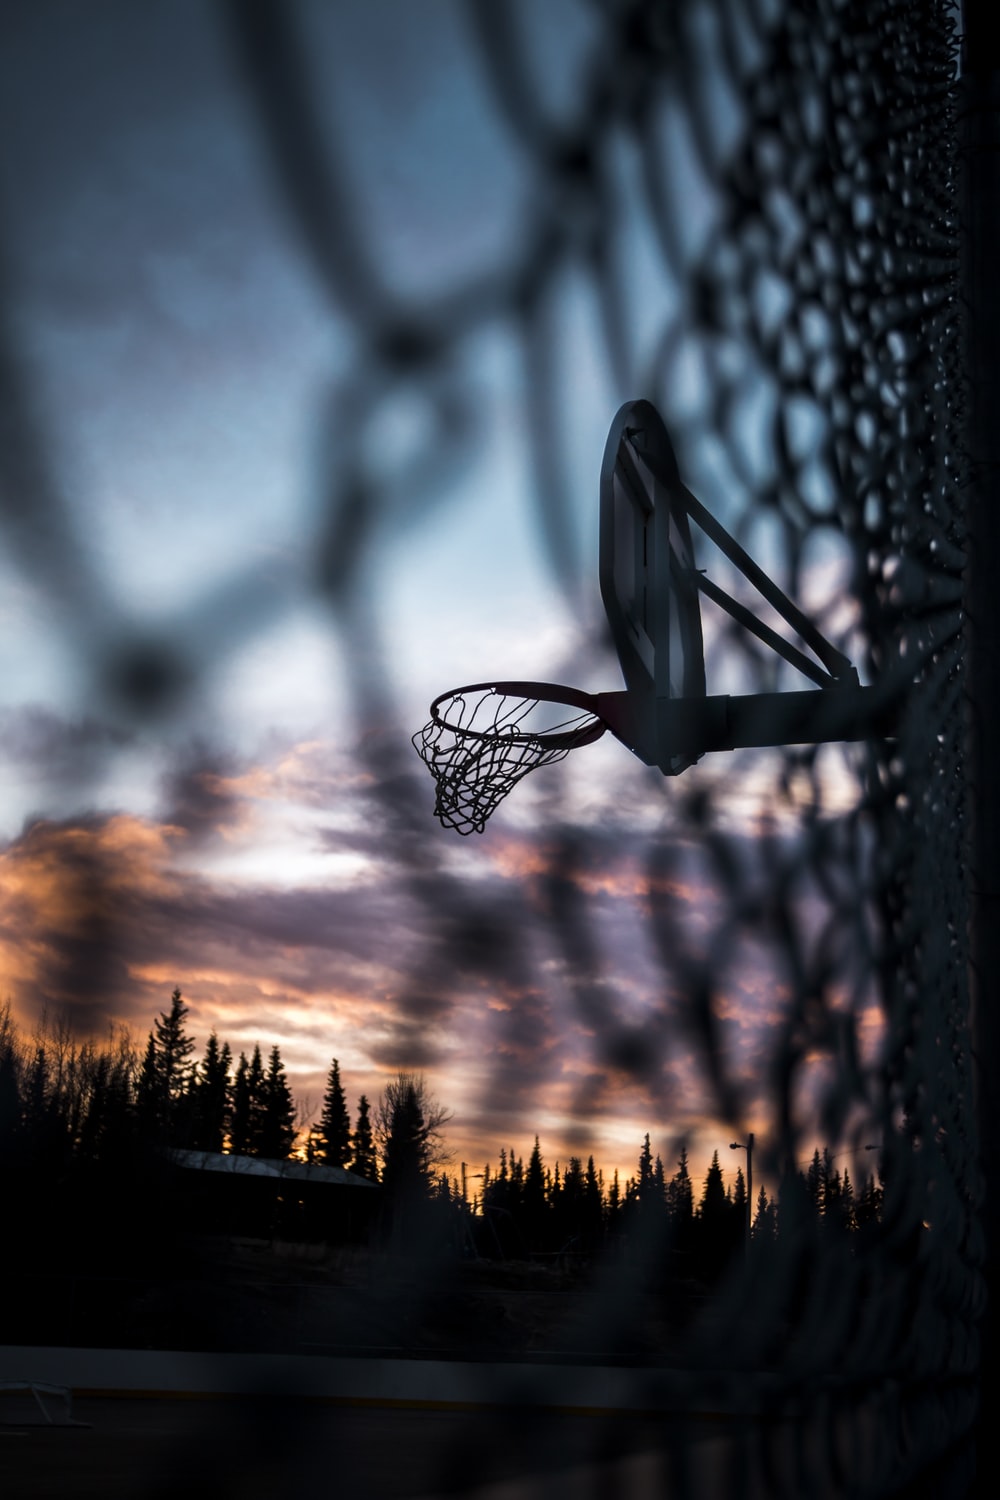 Basketball Image HD Pictures Photos